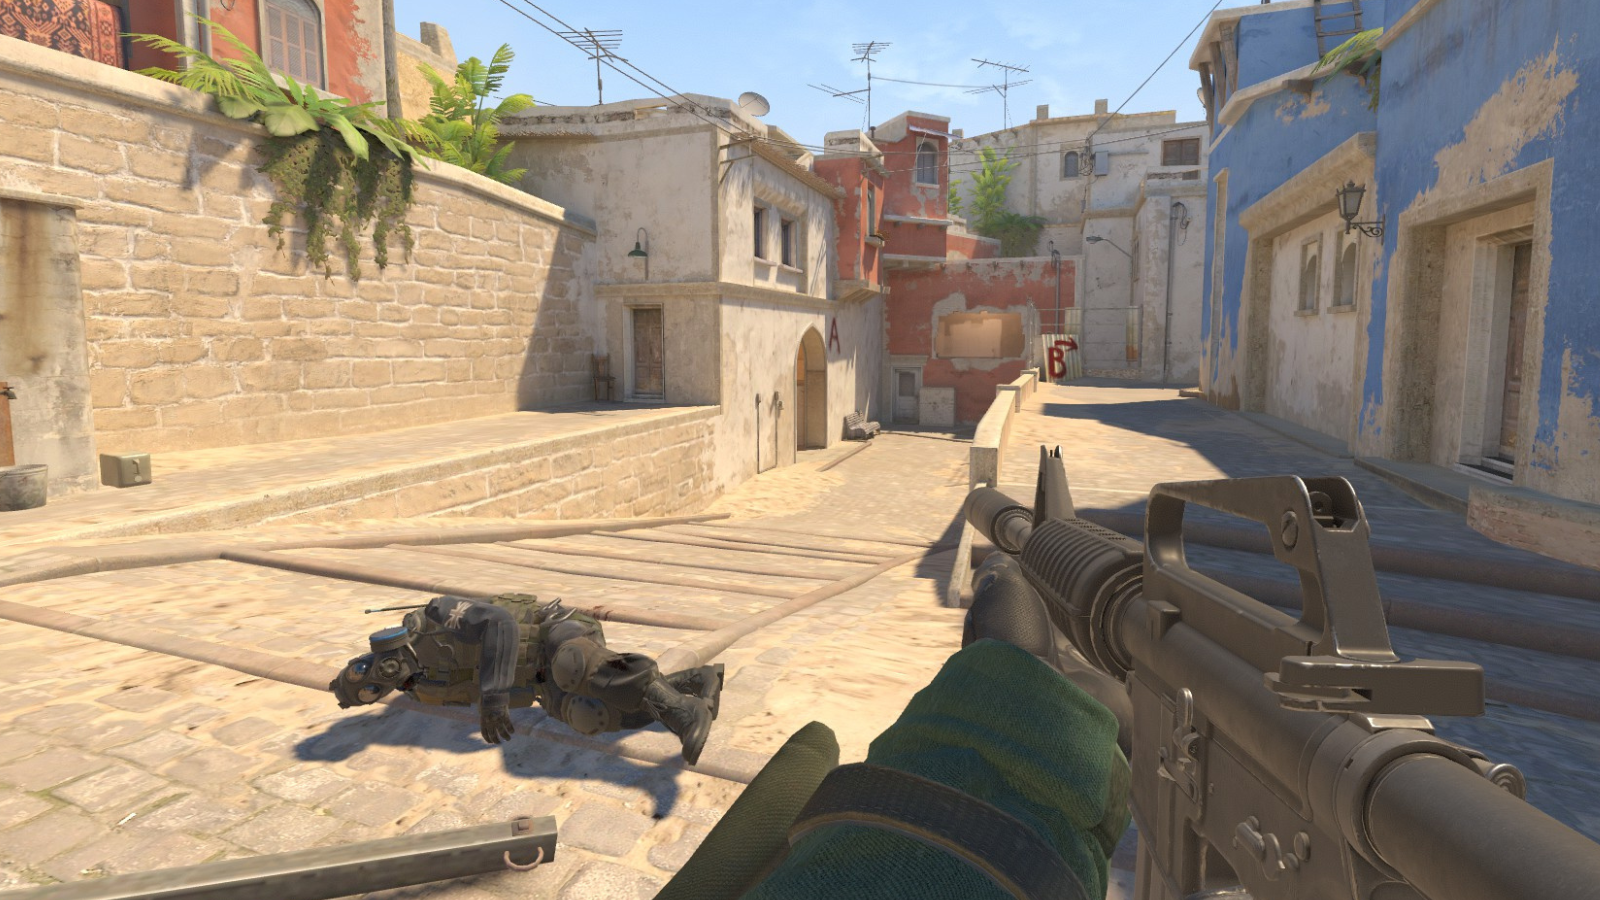 Counter Strike 2 Release Date, Beta Access, and More - Esports